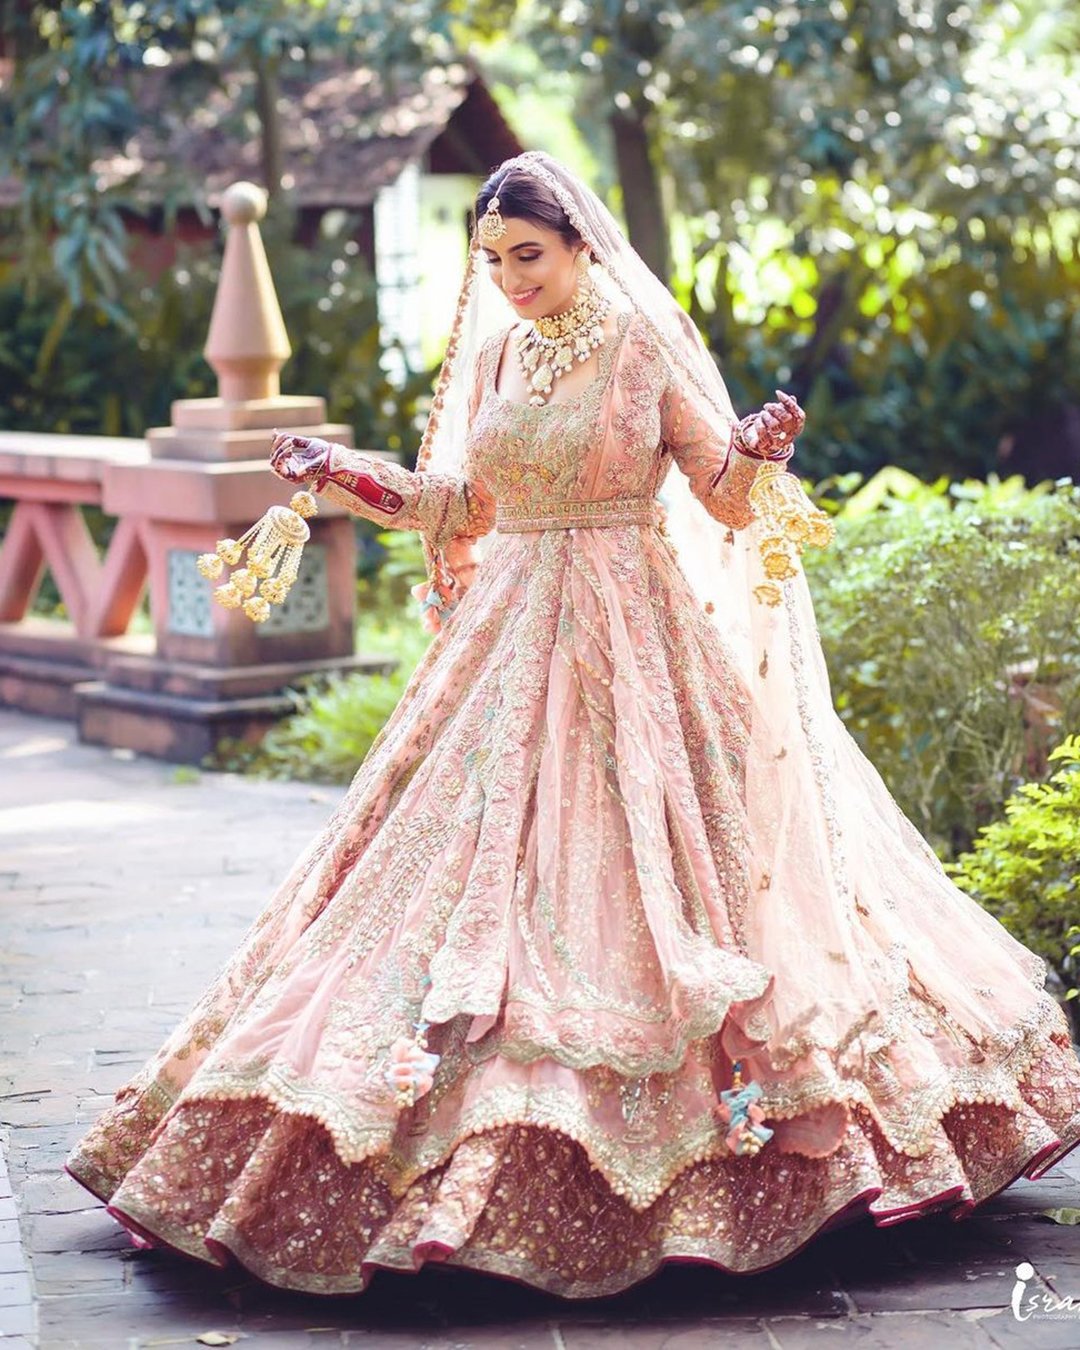 30 Exciting Indian Wedding Dresses That You'll Love